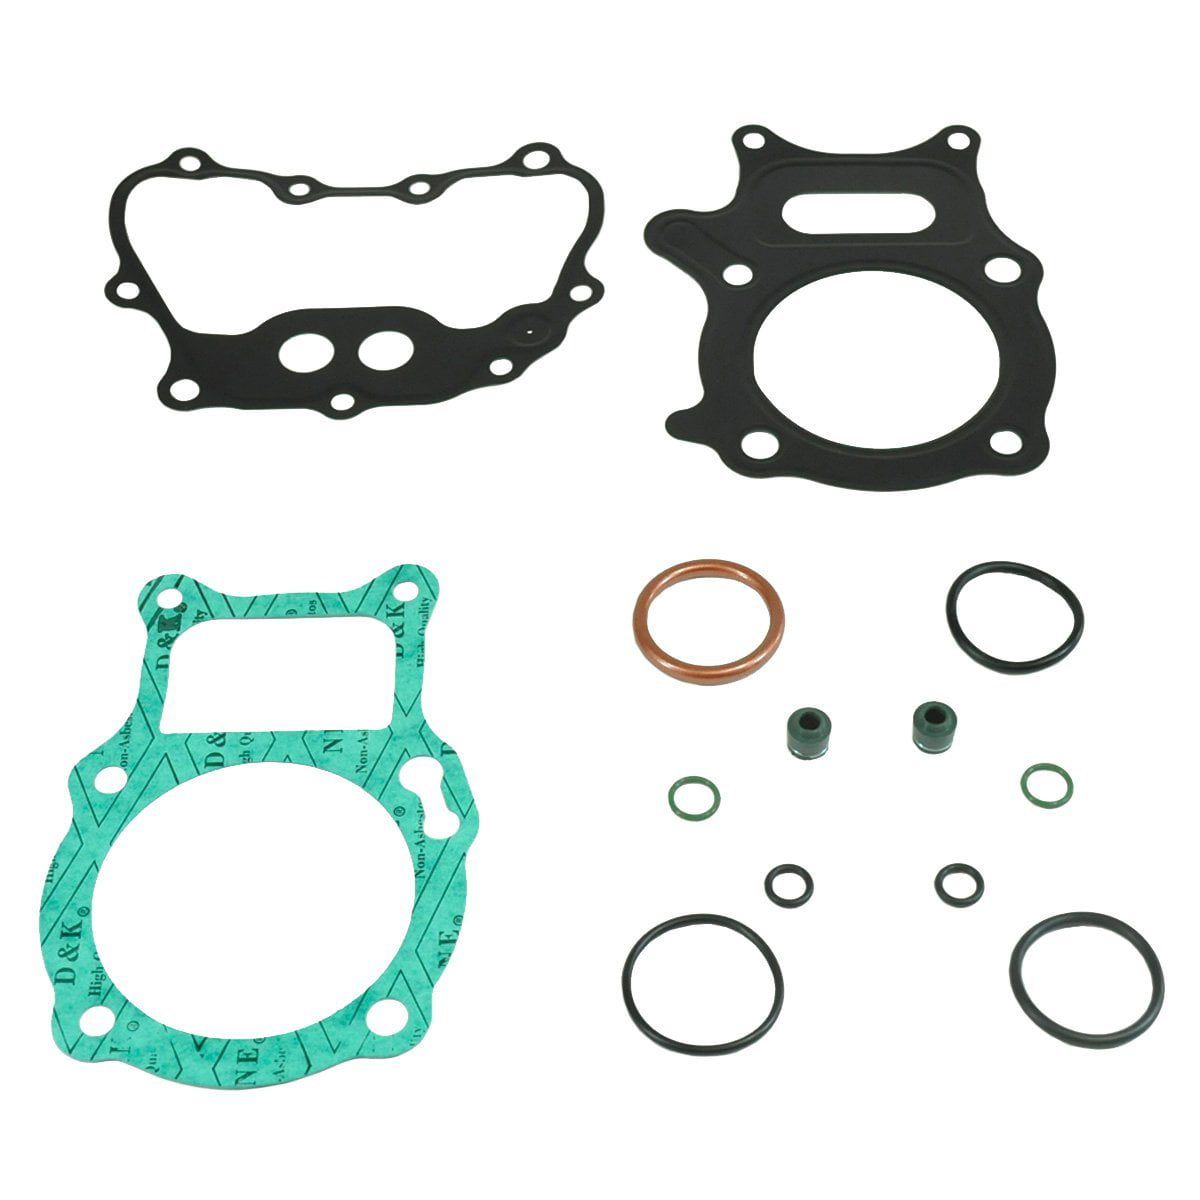 Complete Gasket Kit with Oil Seals For Honda TRX250 Recon 2002-2014 250cc